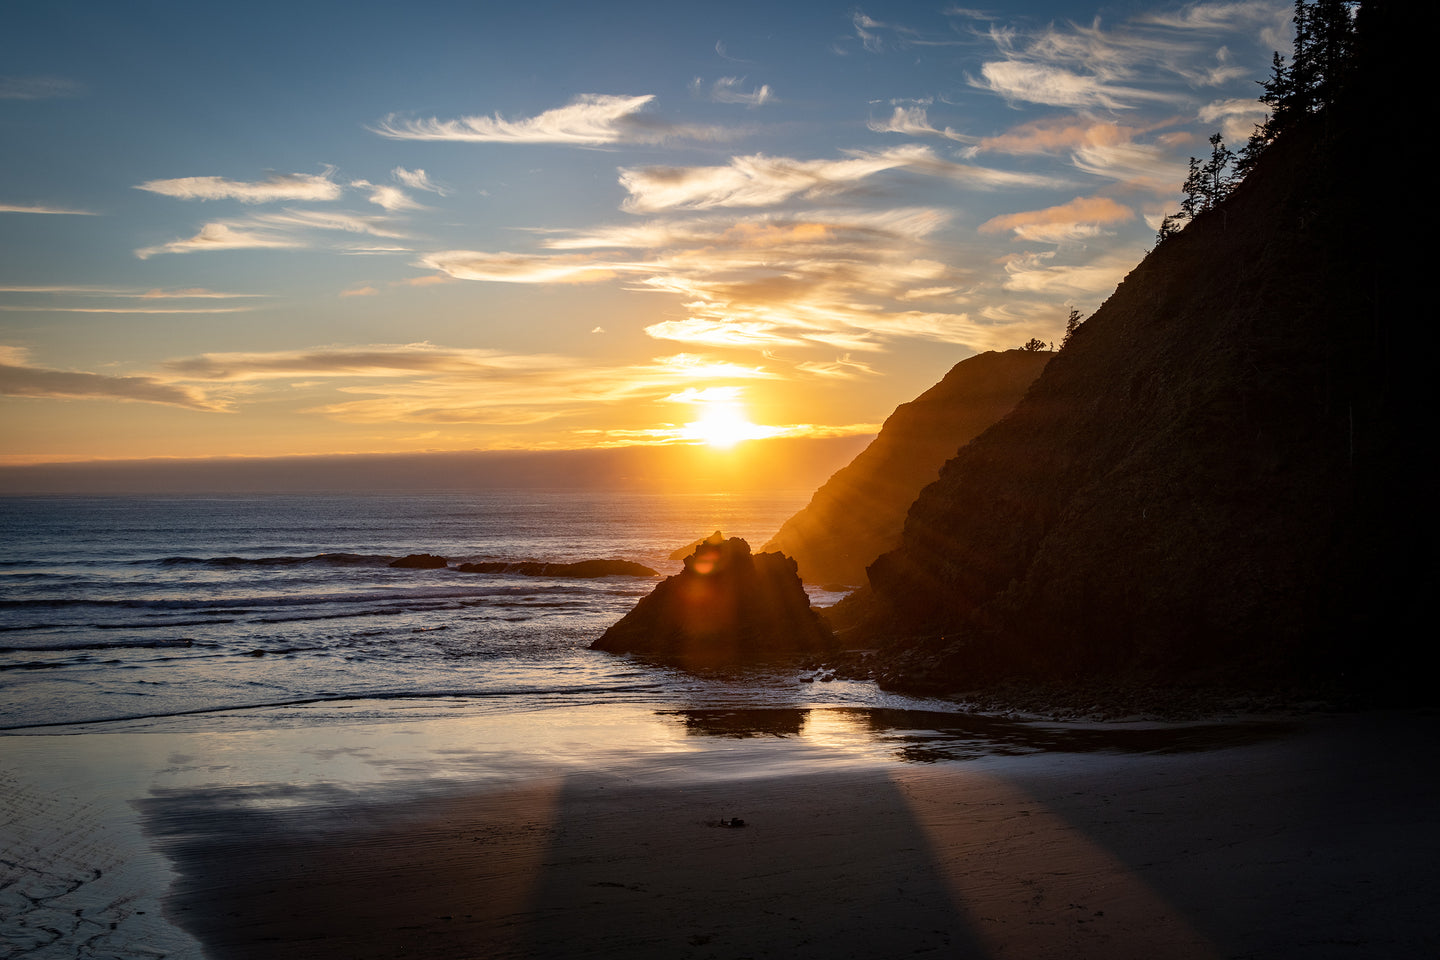 Sunset at Indian Beach in Ecola State Park, Oregon